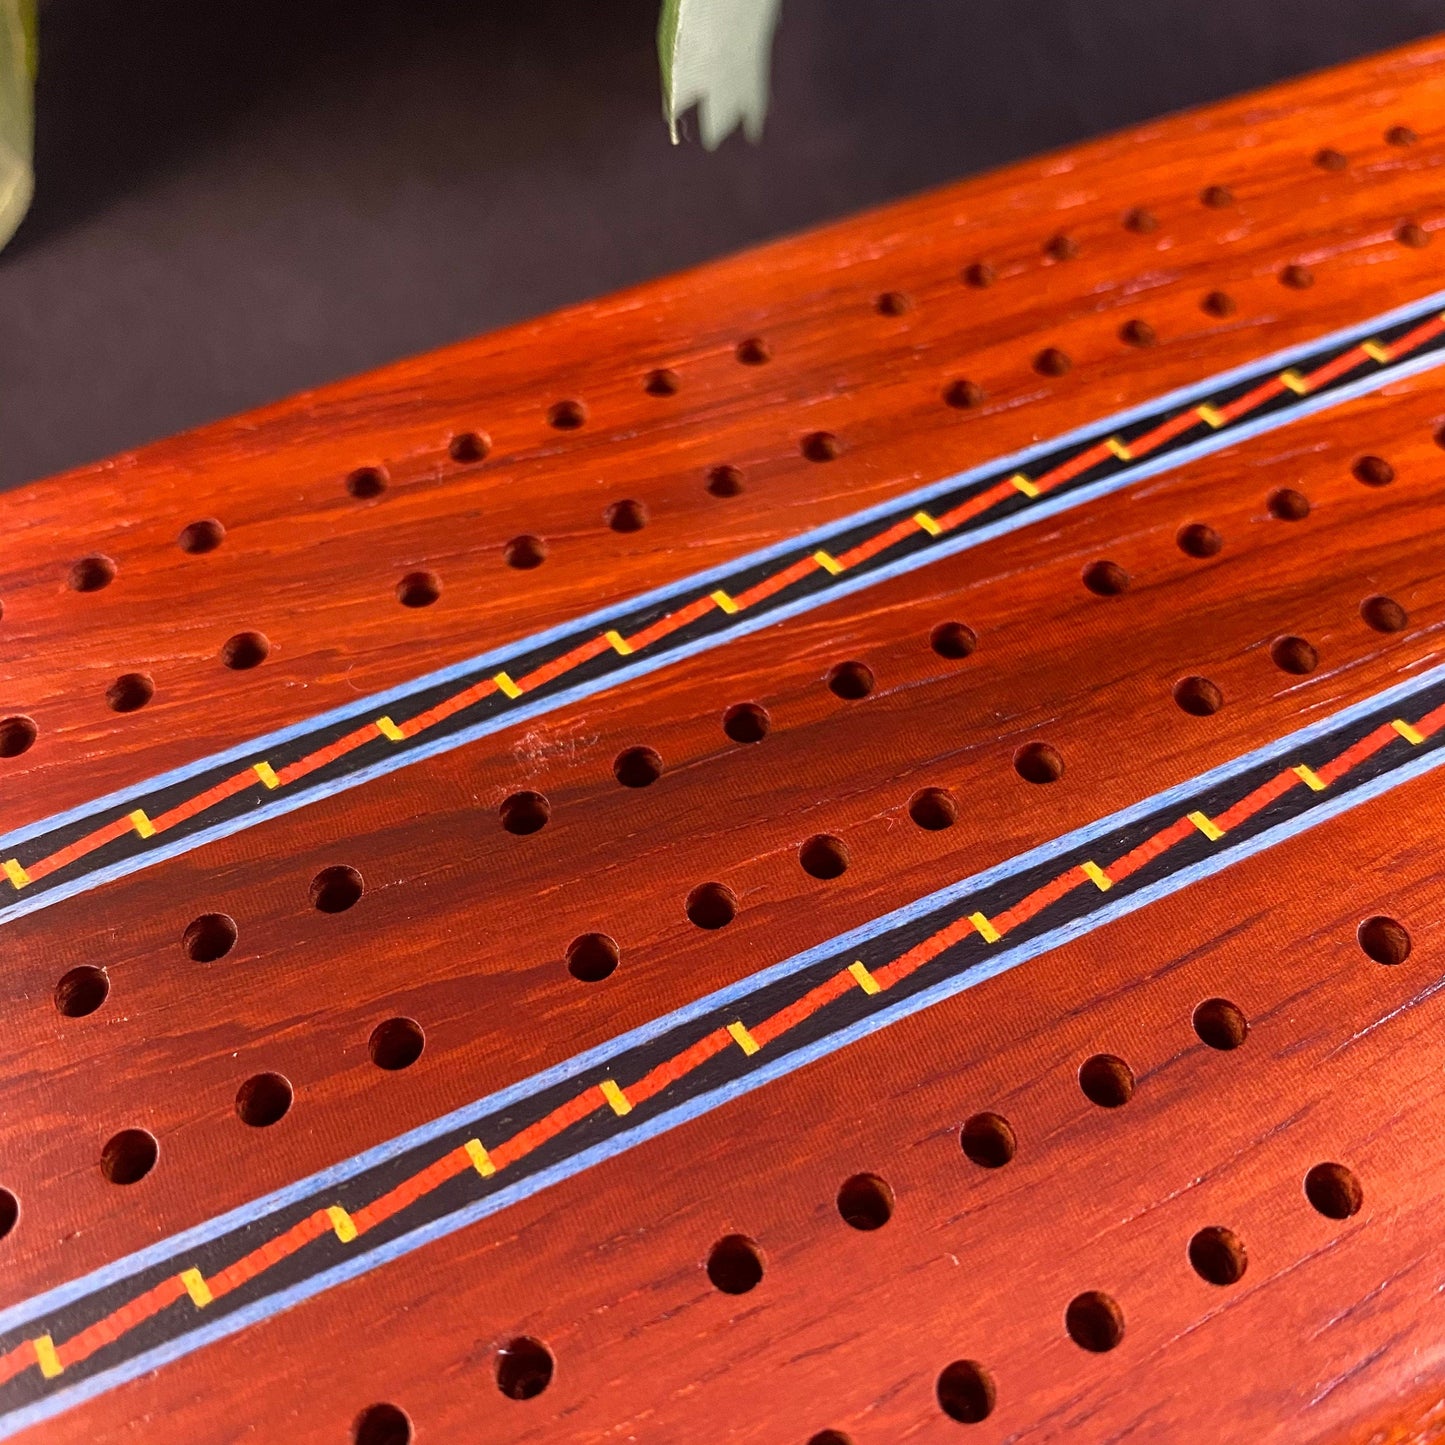 Handmade Wooden Cribbage Board with Cards and Pegs - Padauk